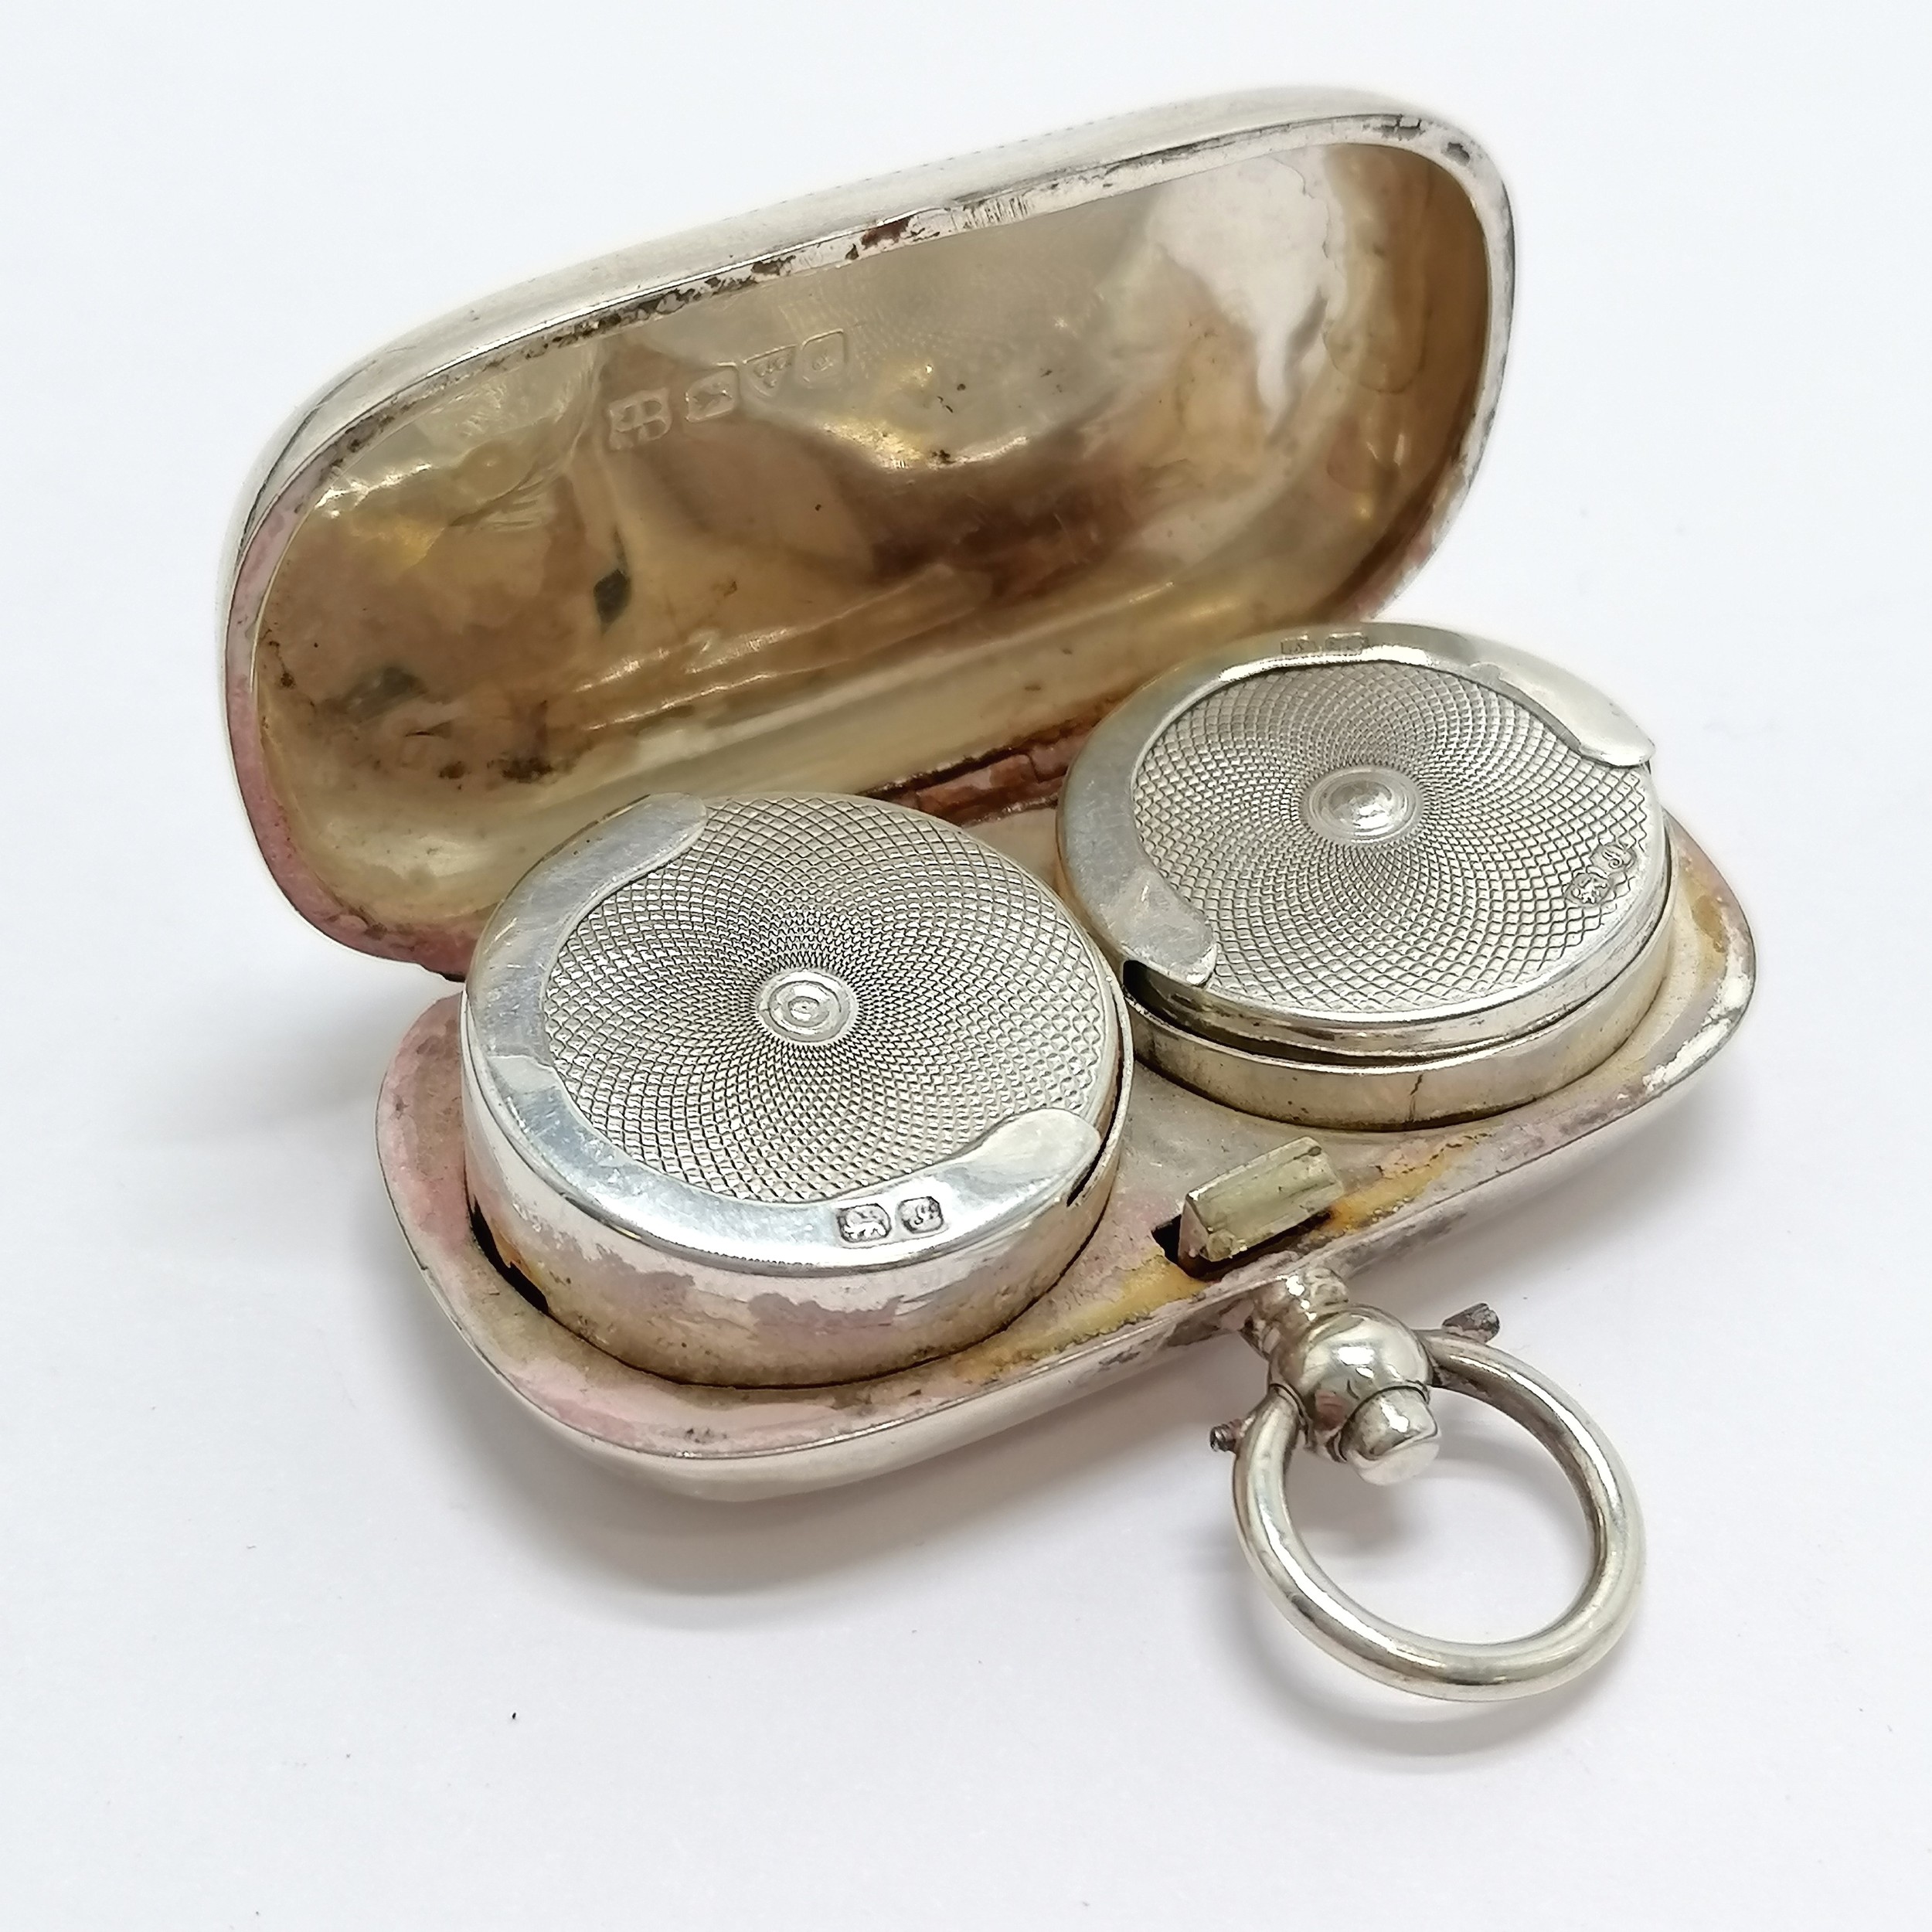 1909 Chester silver double sovereign holder by James Deakin & Sons - 5.2cm across & 27g total weight